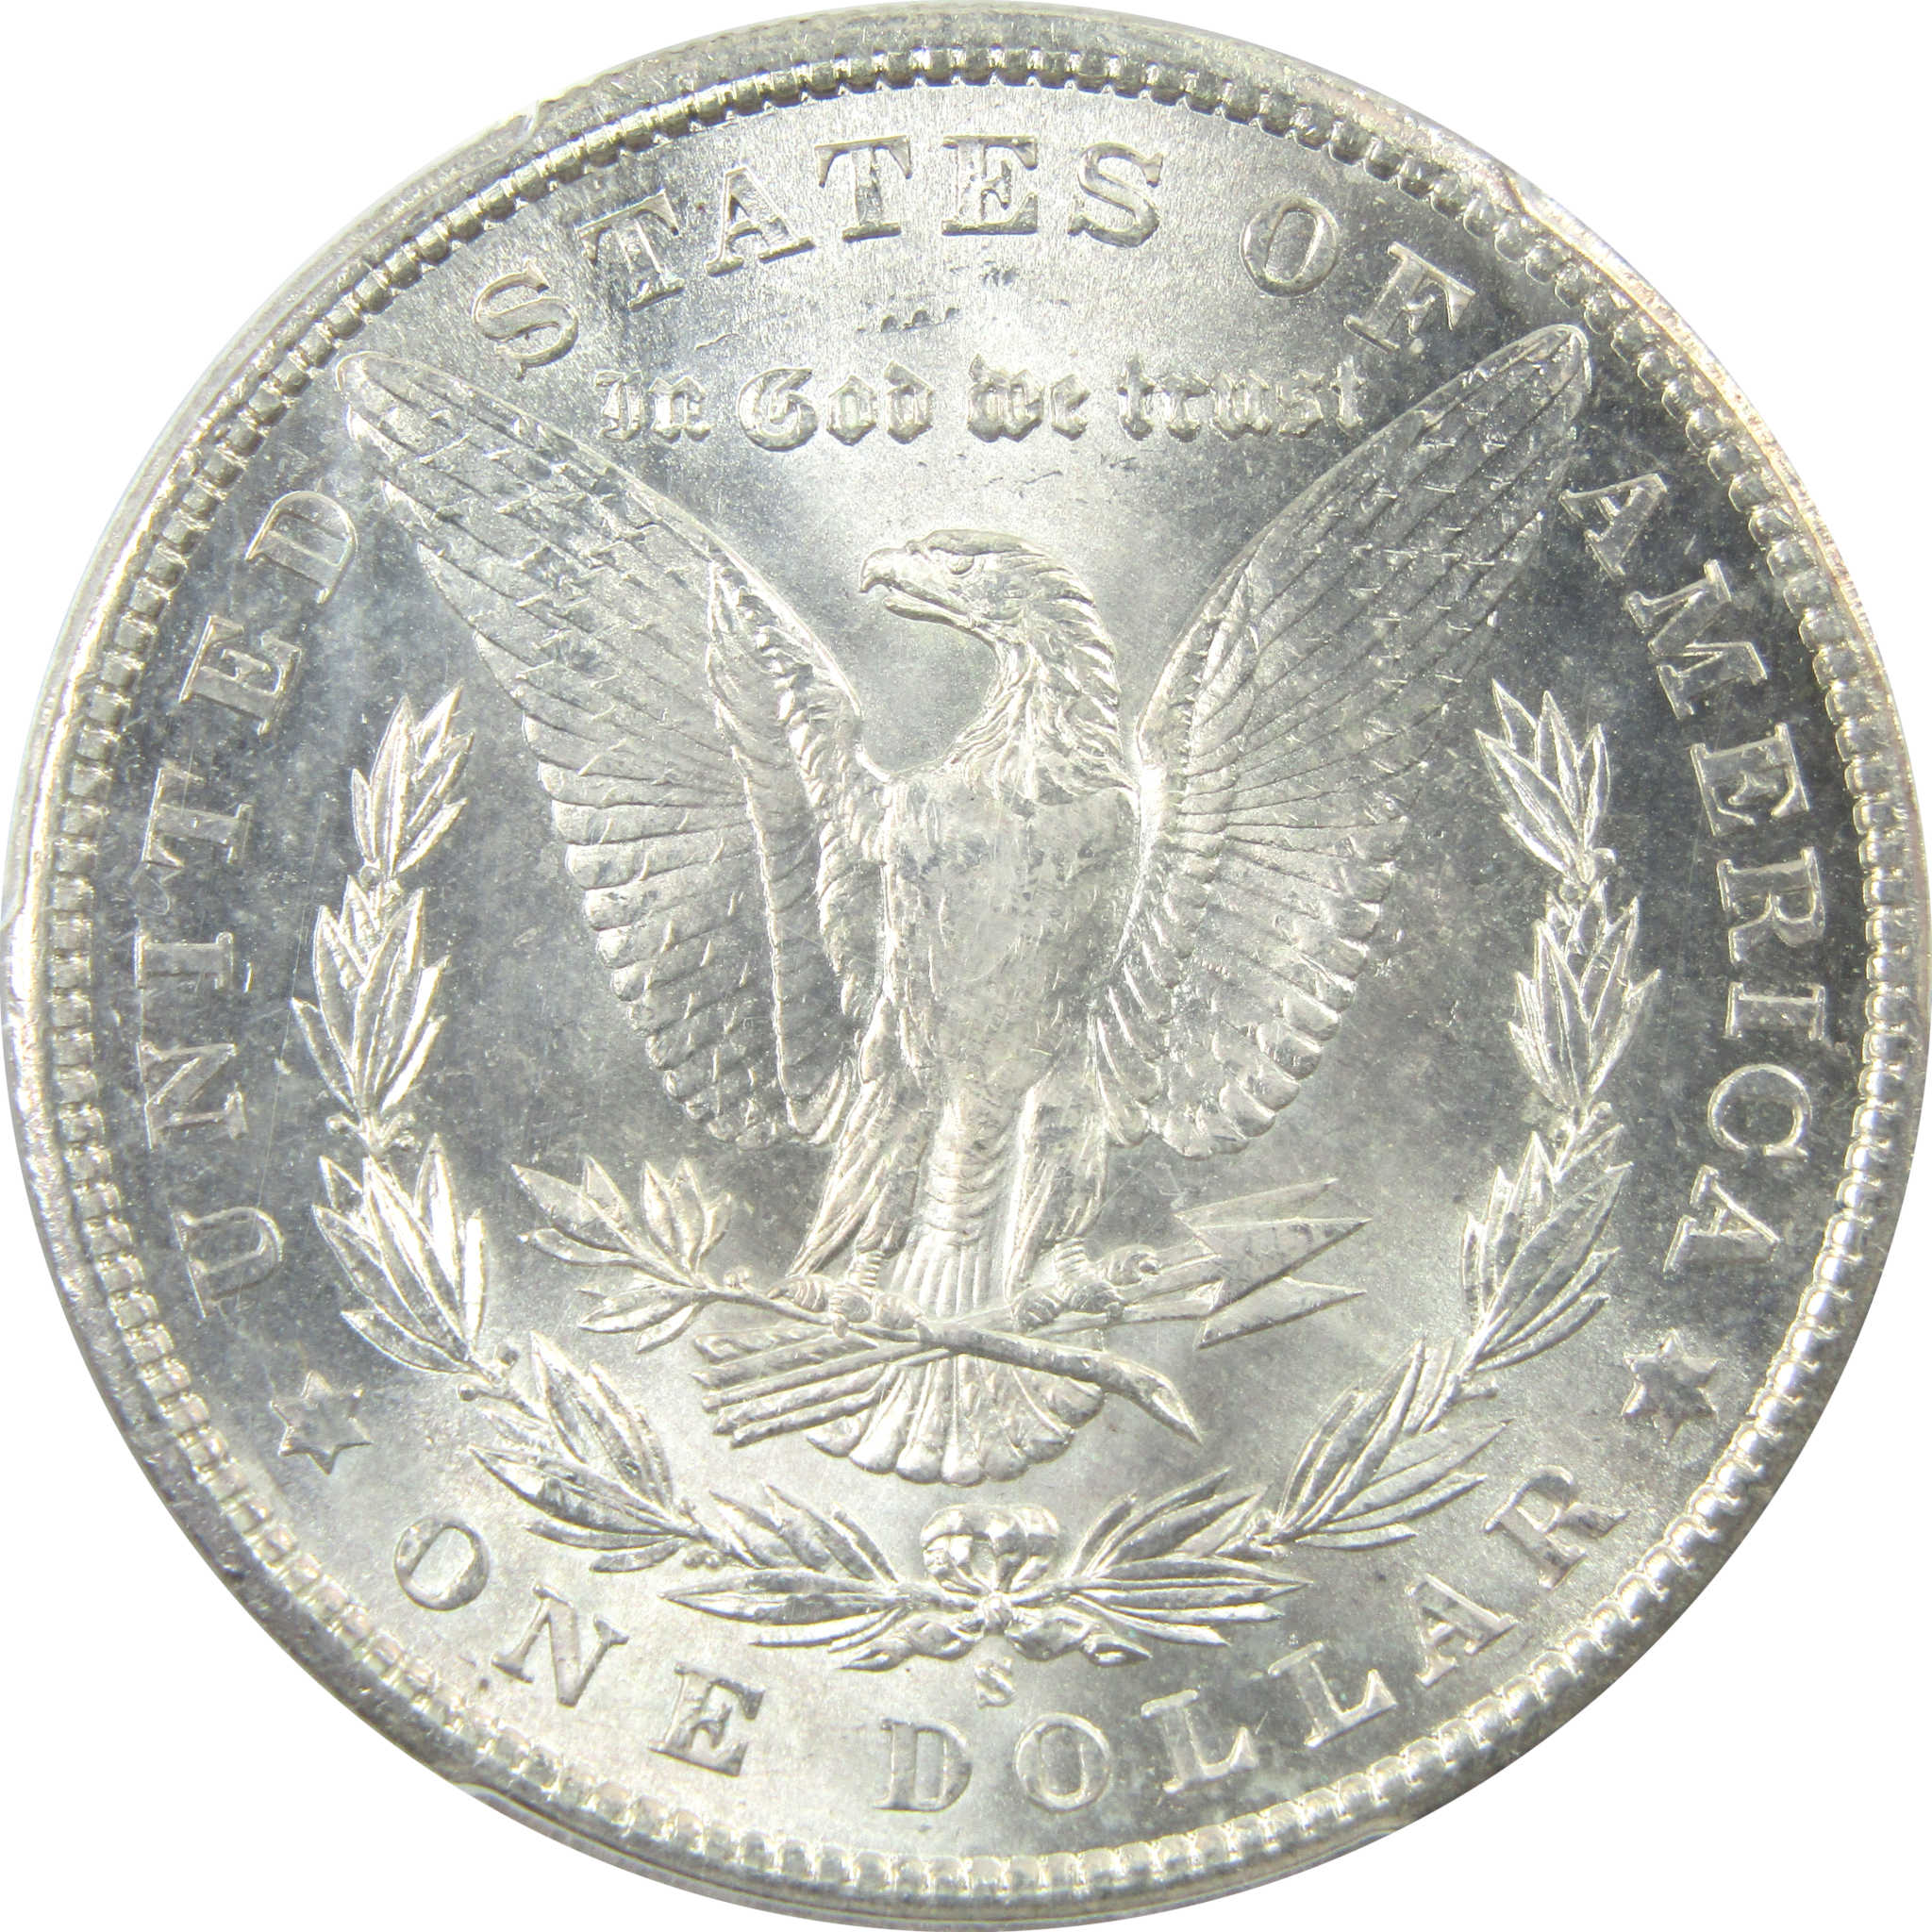 1900 S Morgan Dollar MS 63 PCGS Silver $1 Uncirculated Coin SKU:I13796 - Morgan coin - Morgan silver dollar - Morgan silver dollar for sale - Profile Coins &amp; Collectibles